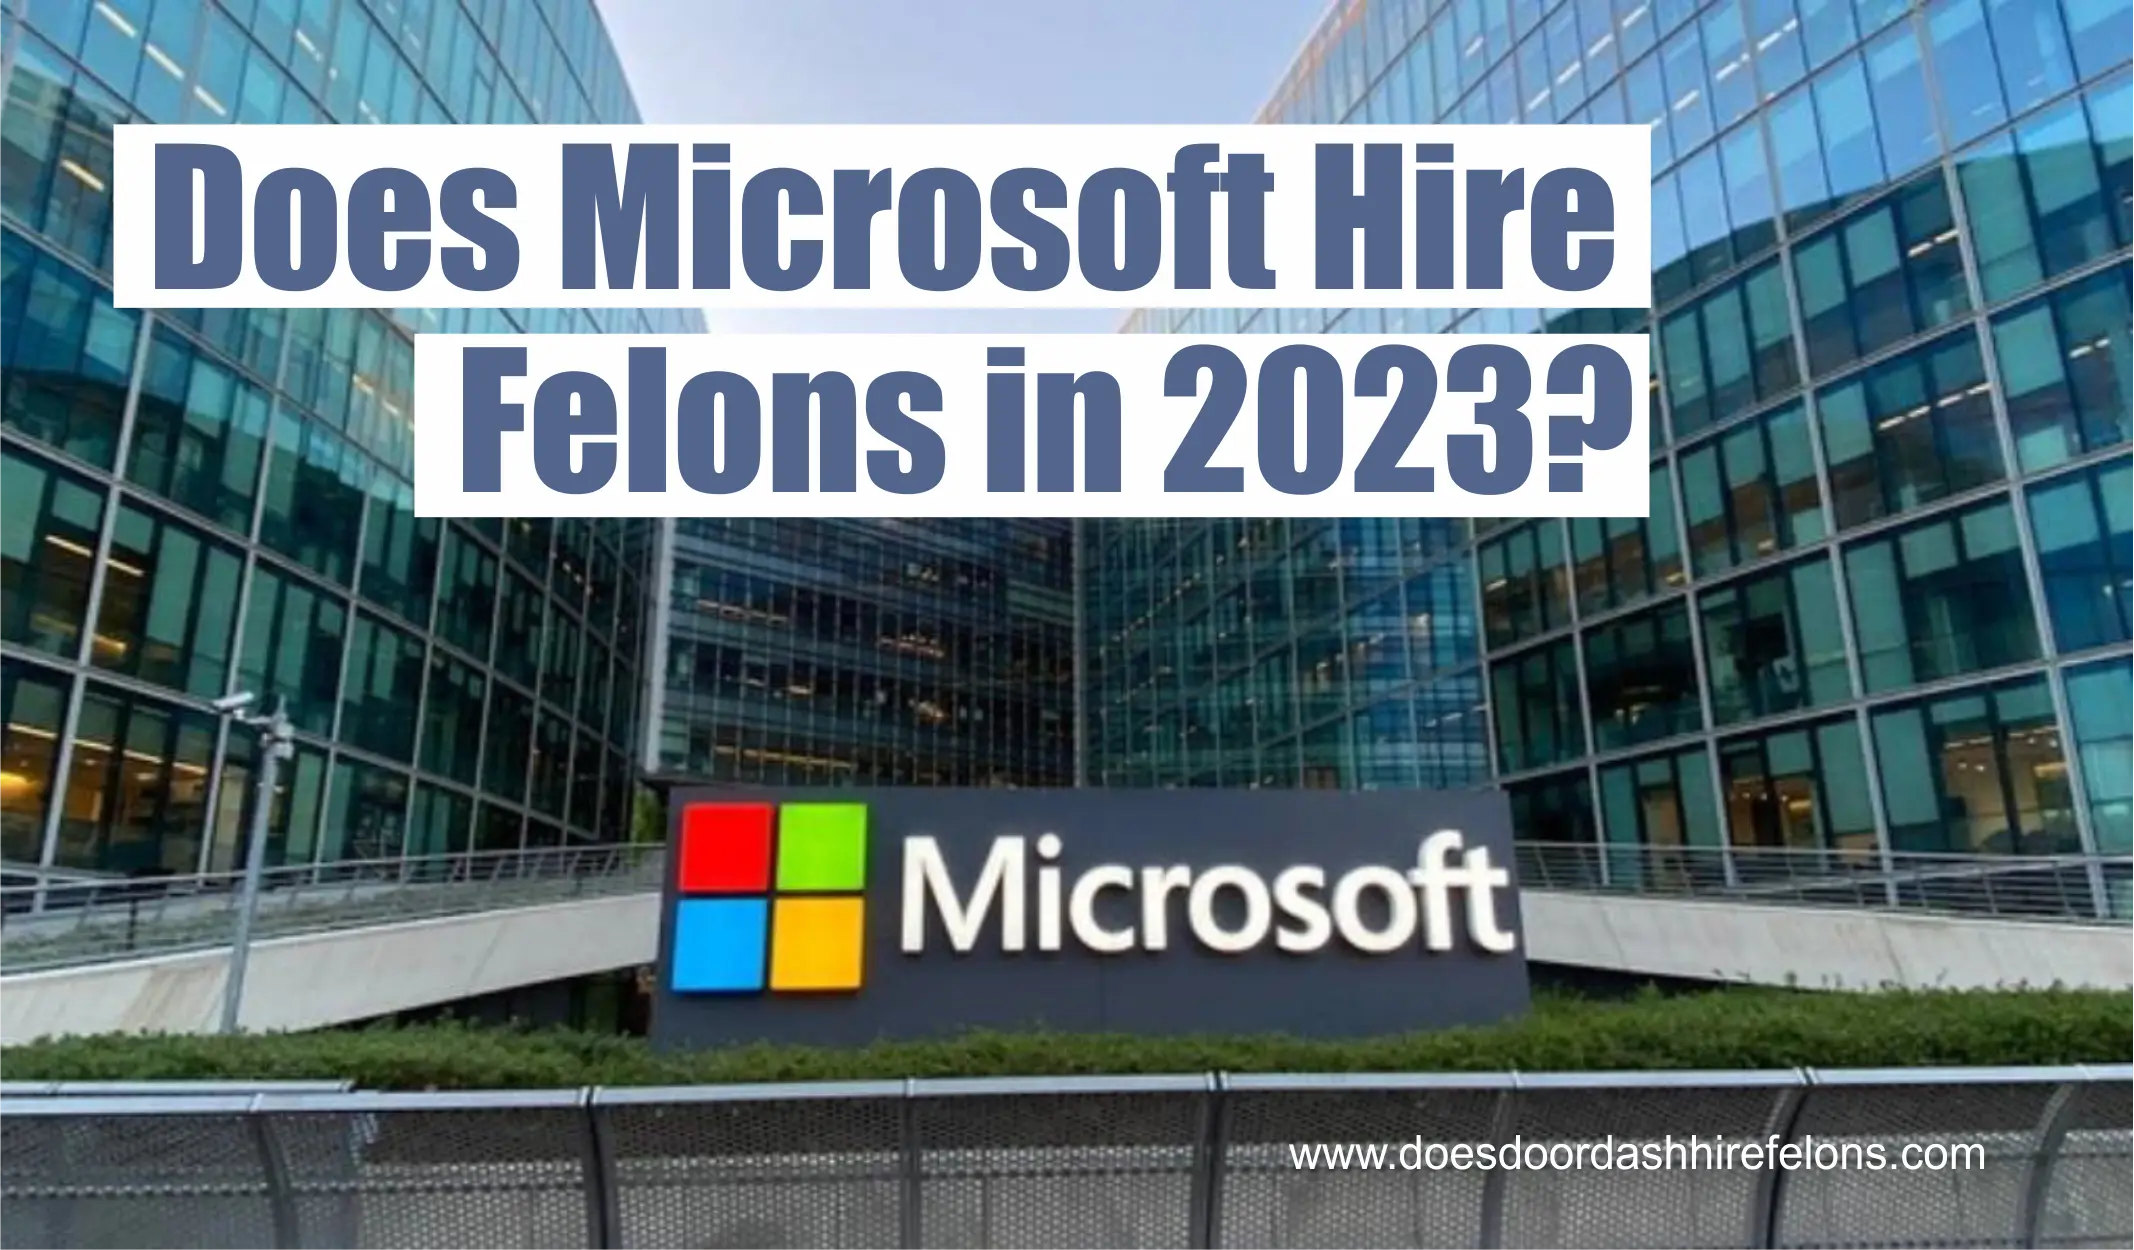 Does Microsoft Hire Felons in 2023?